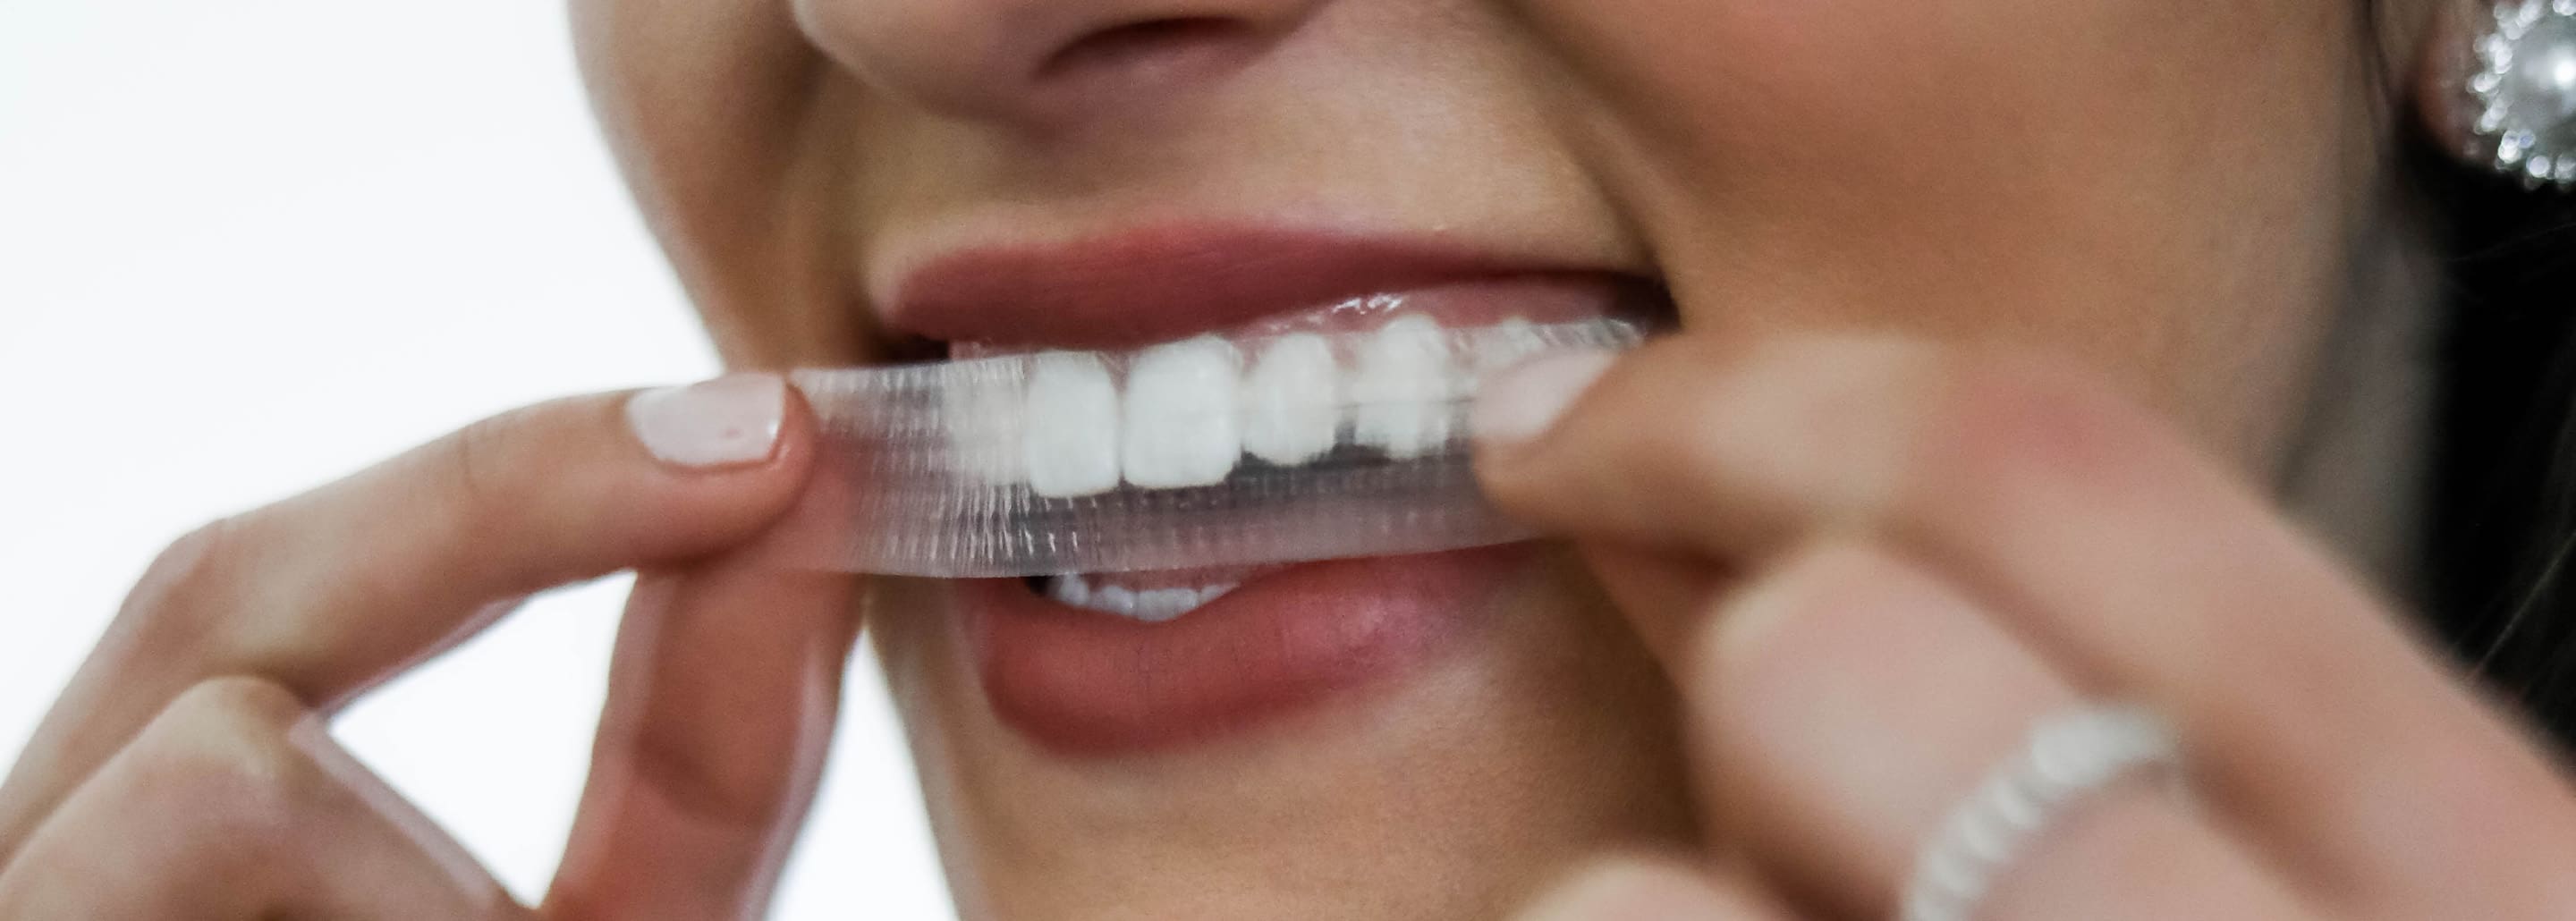 Affordable Teeth Whitening Options